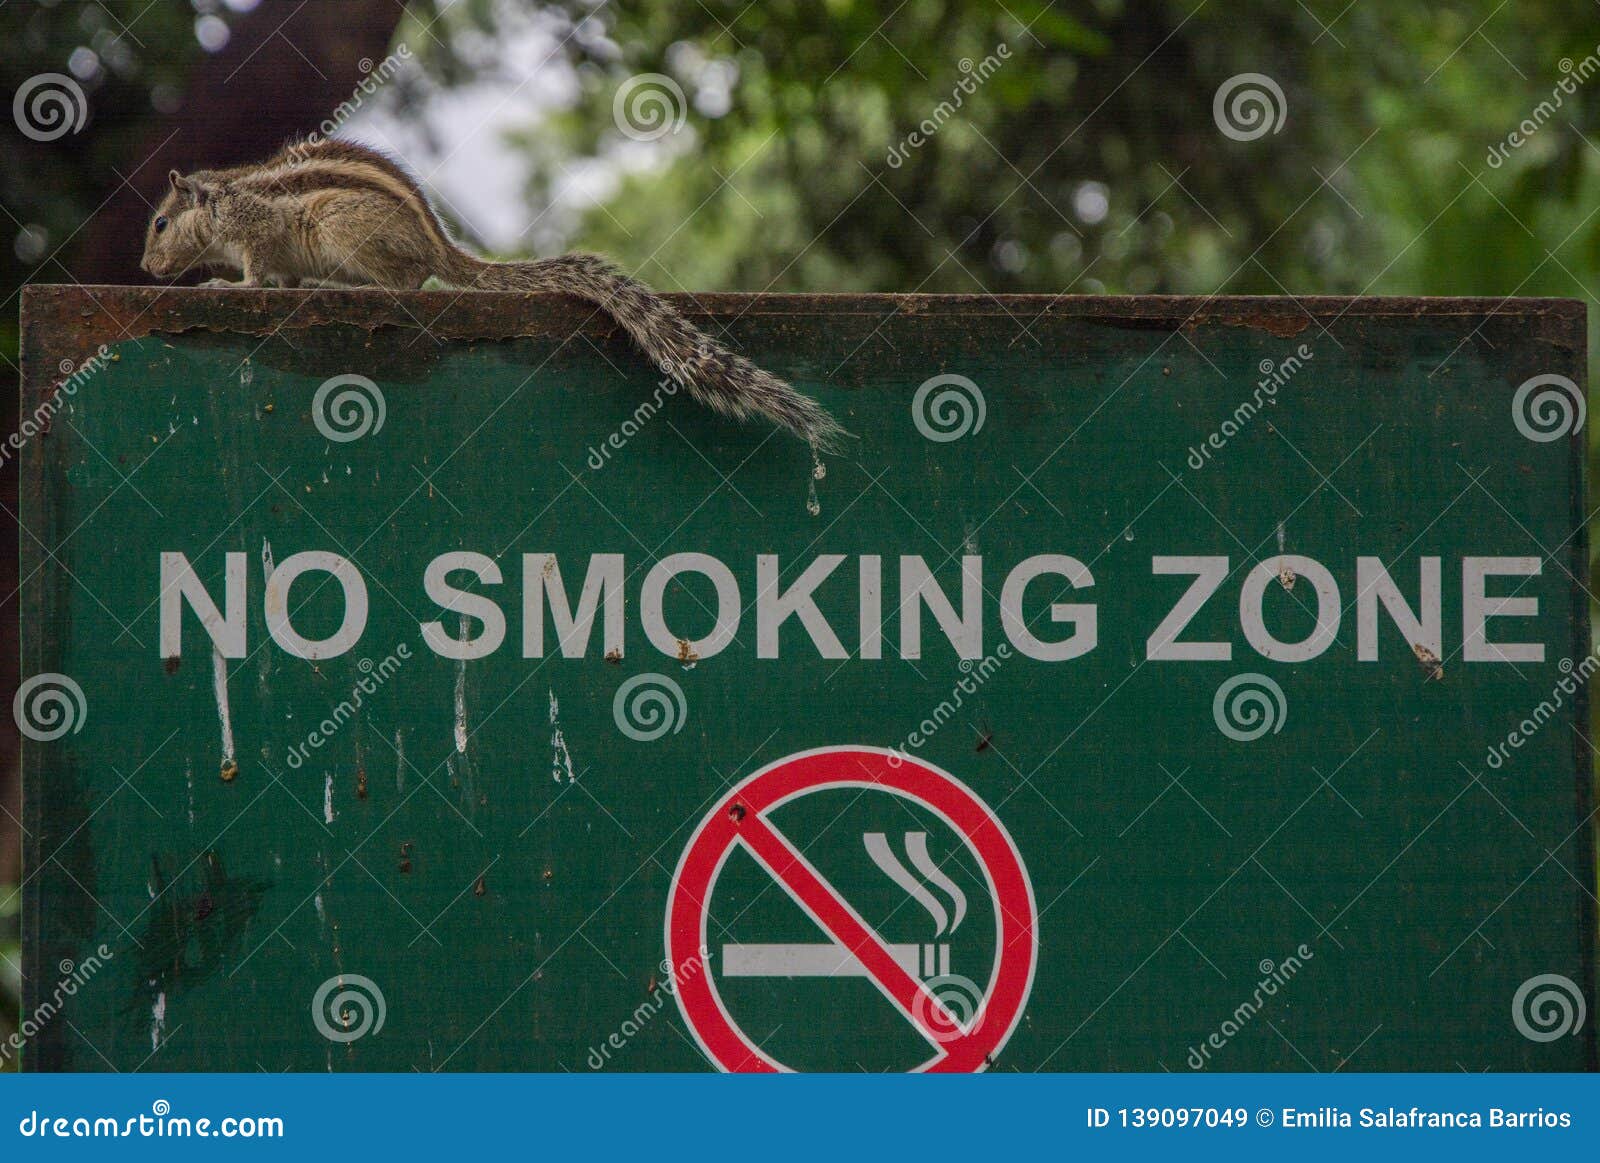 squirrel on a smoking prohibited sign. funambulus genus of sciuromorphic rodents of the sciuridae family known as palm squirrels